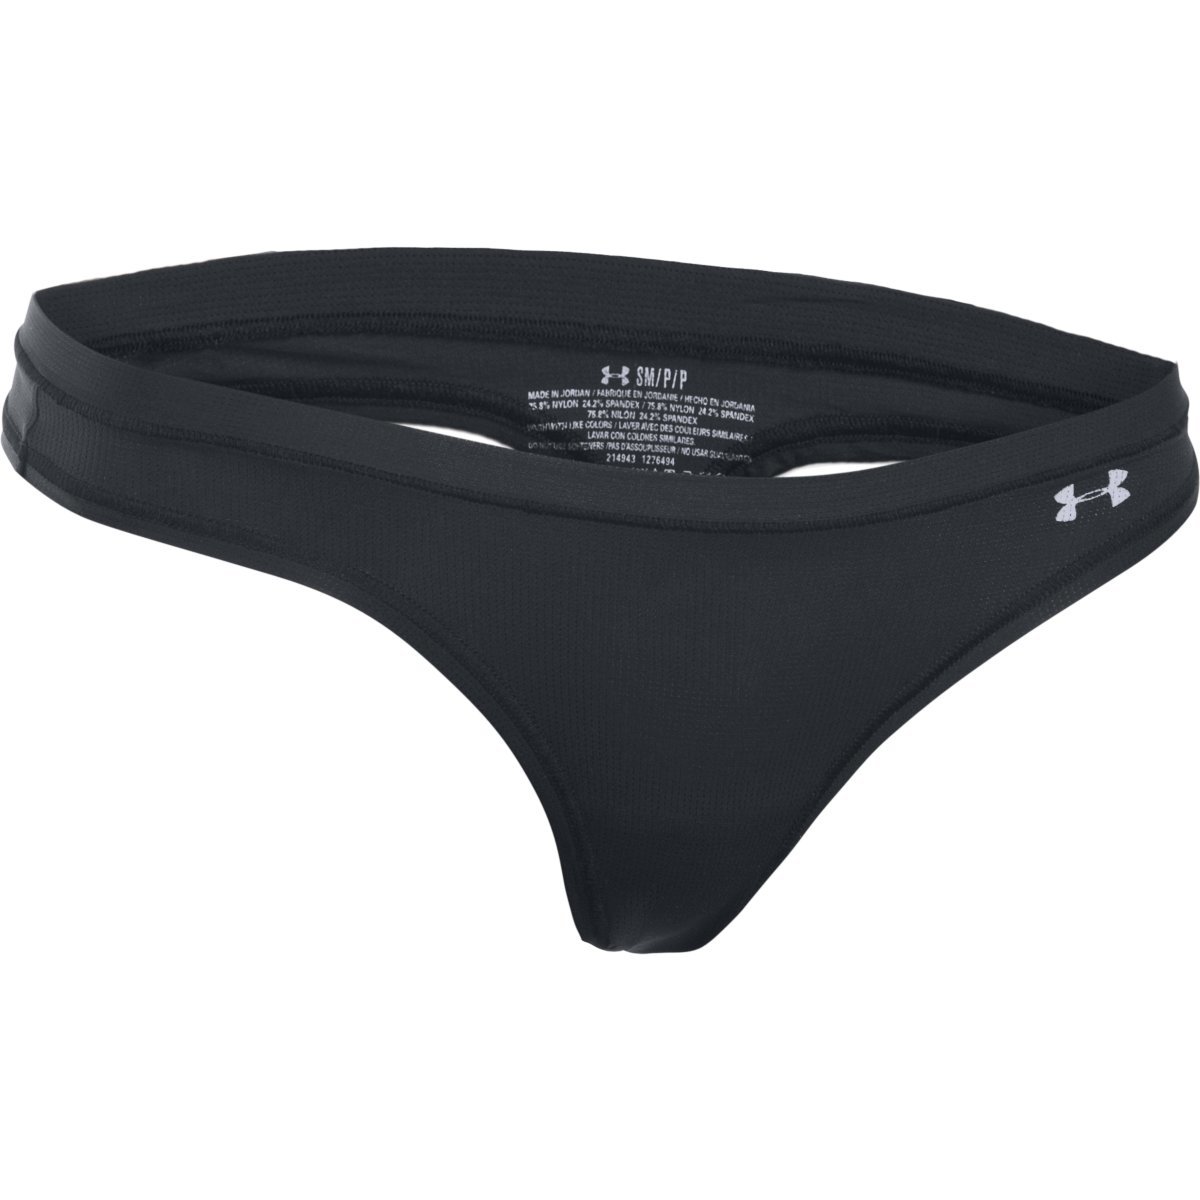 UNDER ARMOUR Women's Pure Stretch Sheer Thong - Eastern Mountain